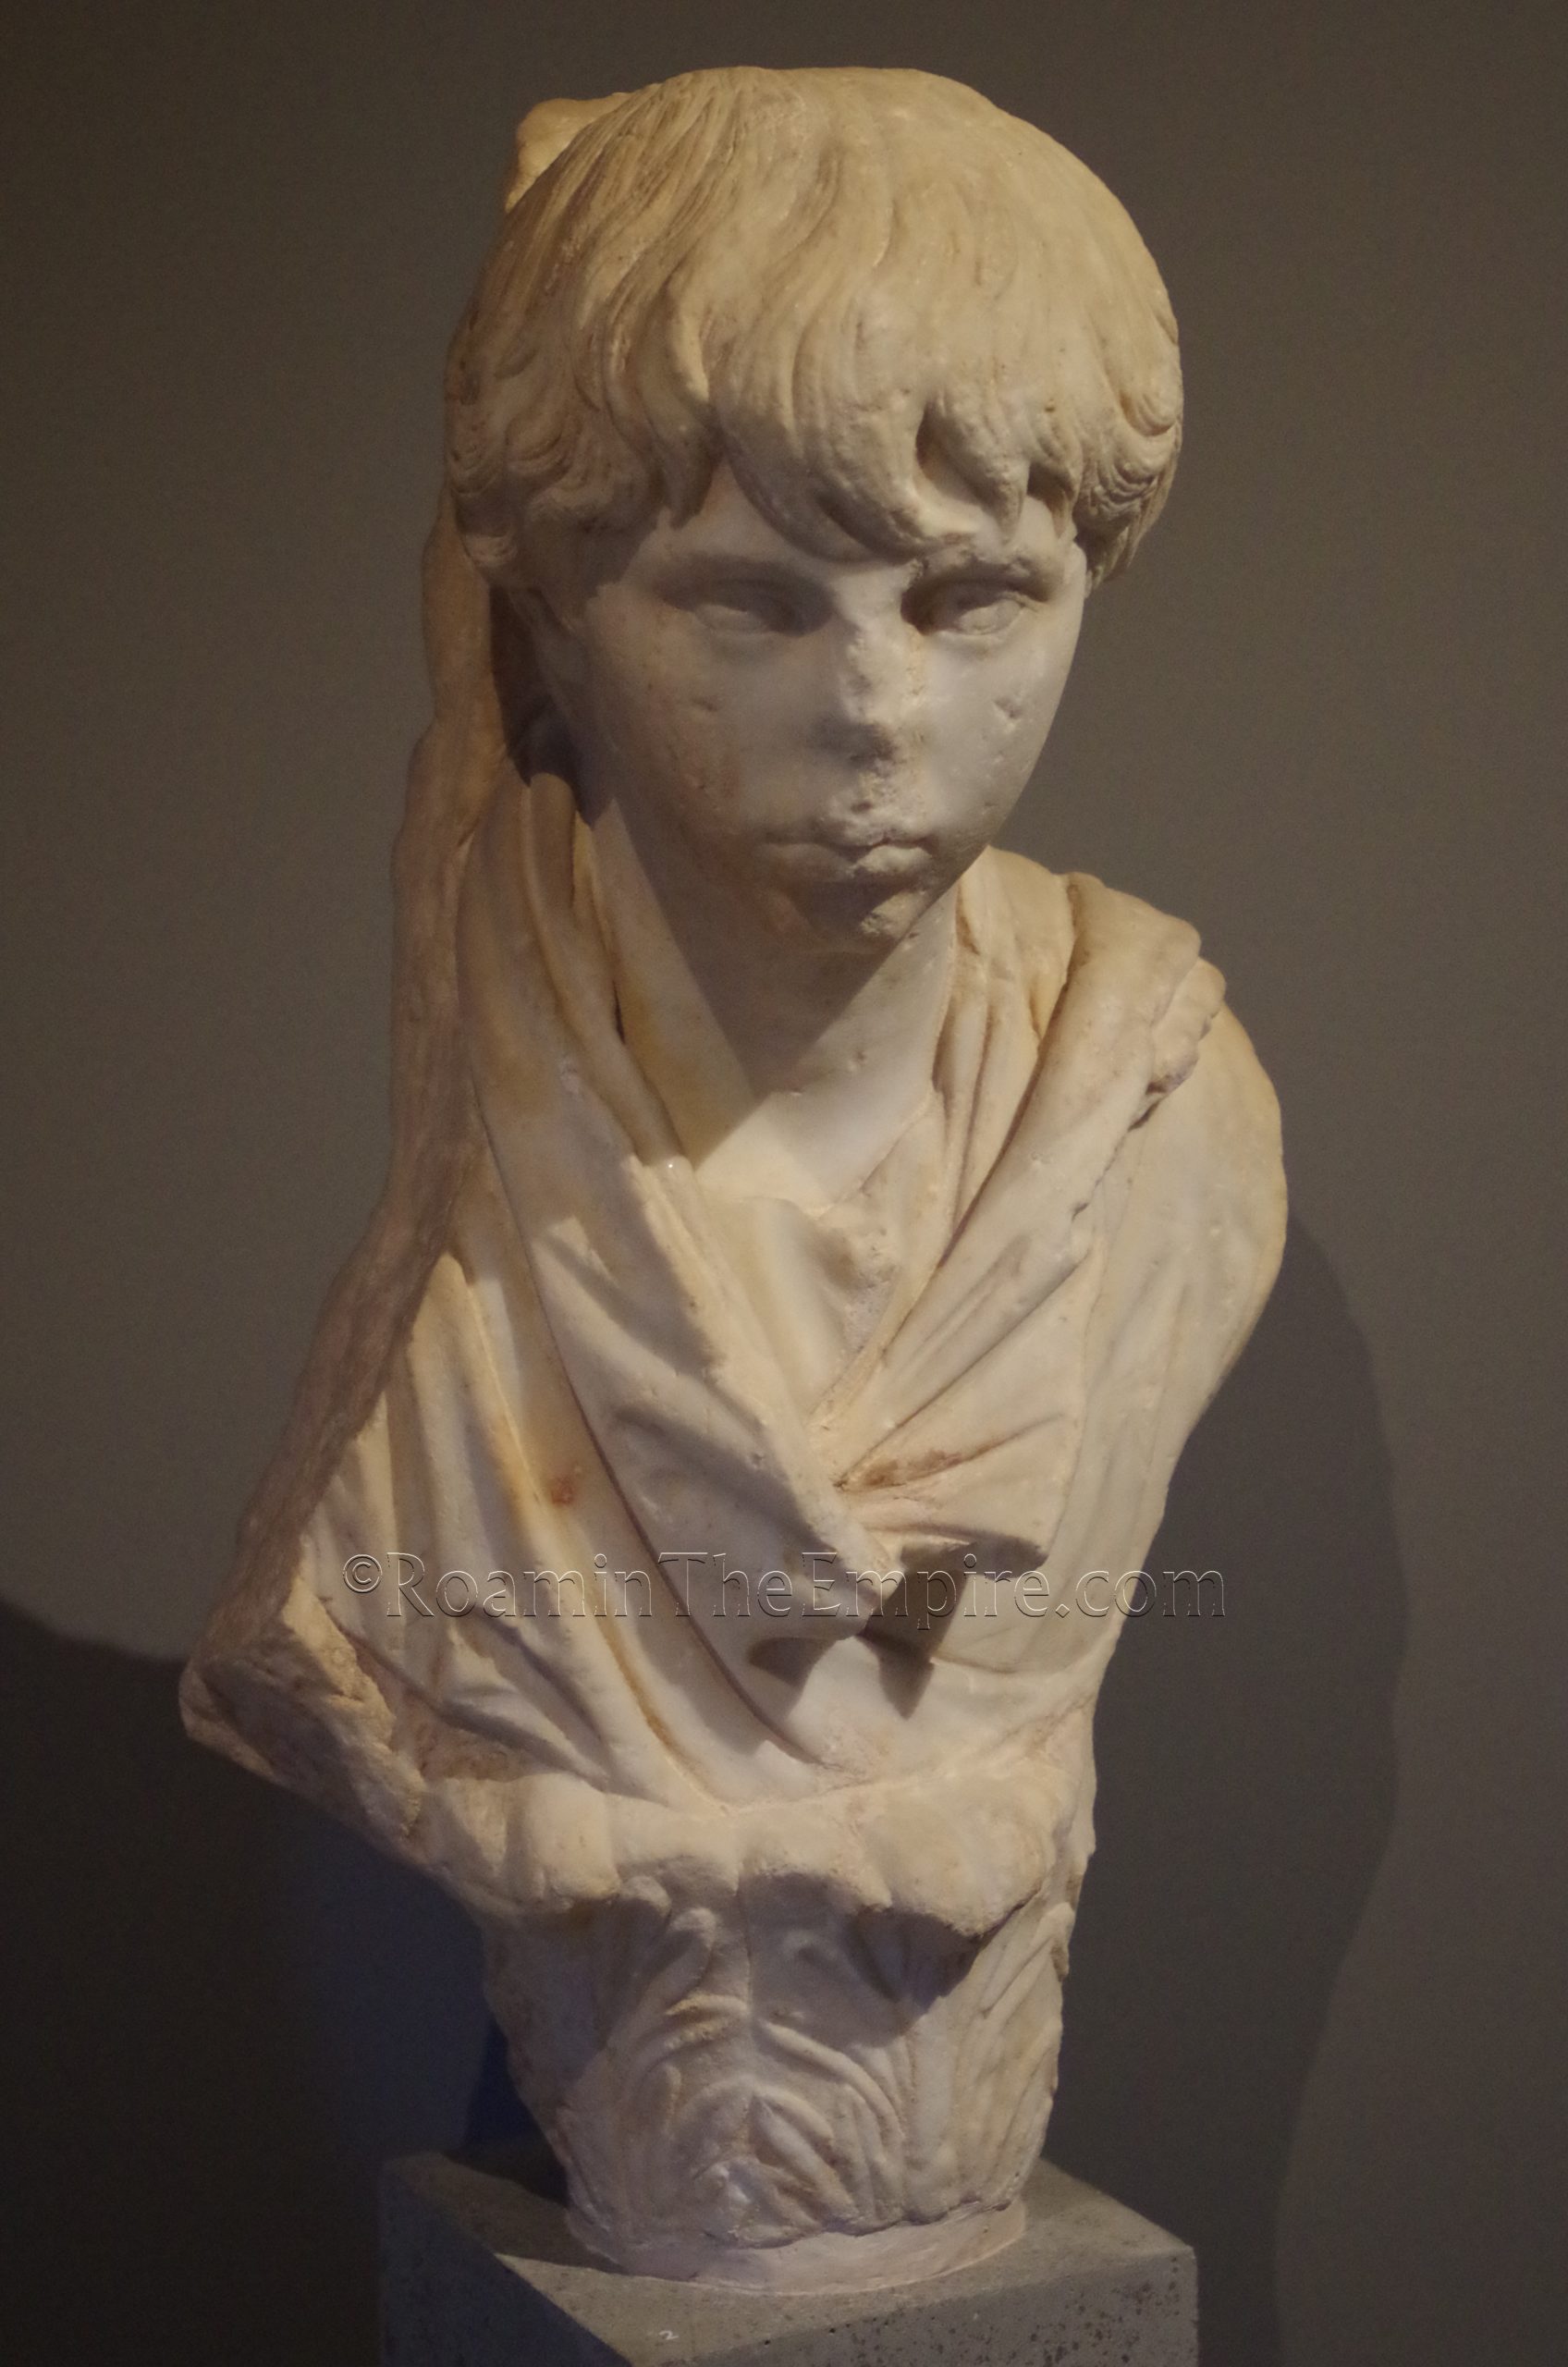 Bust of Polydeukeion, the favored pupil of Herodes Atticus who died at the age of 15. Dated to the 2nd century CE. New Archaeological Museum of Chalkis "Arethousa."